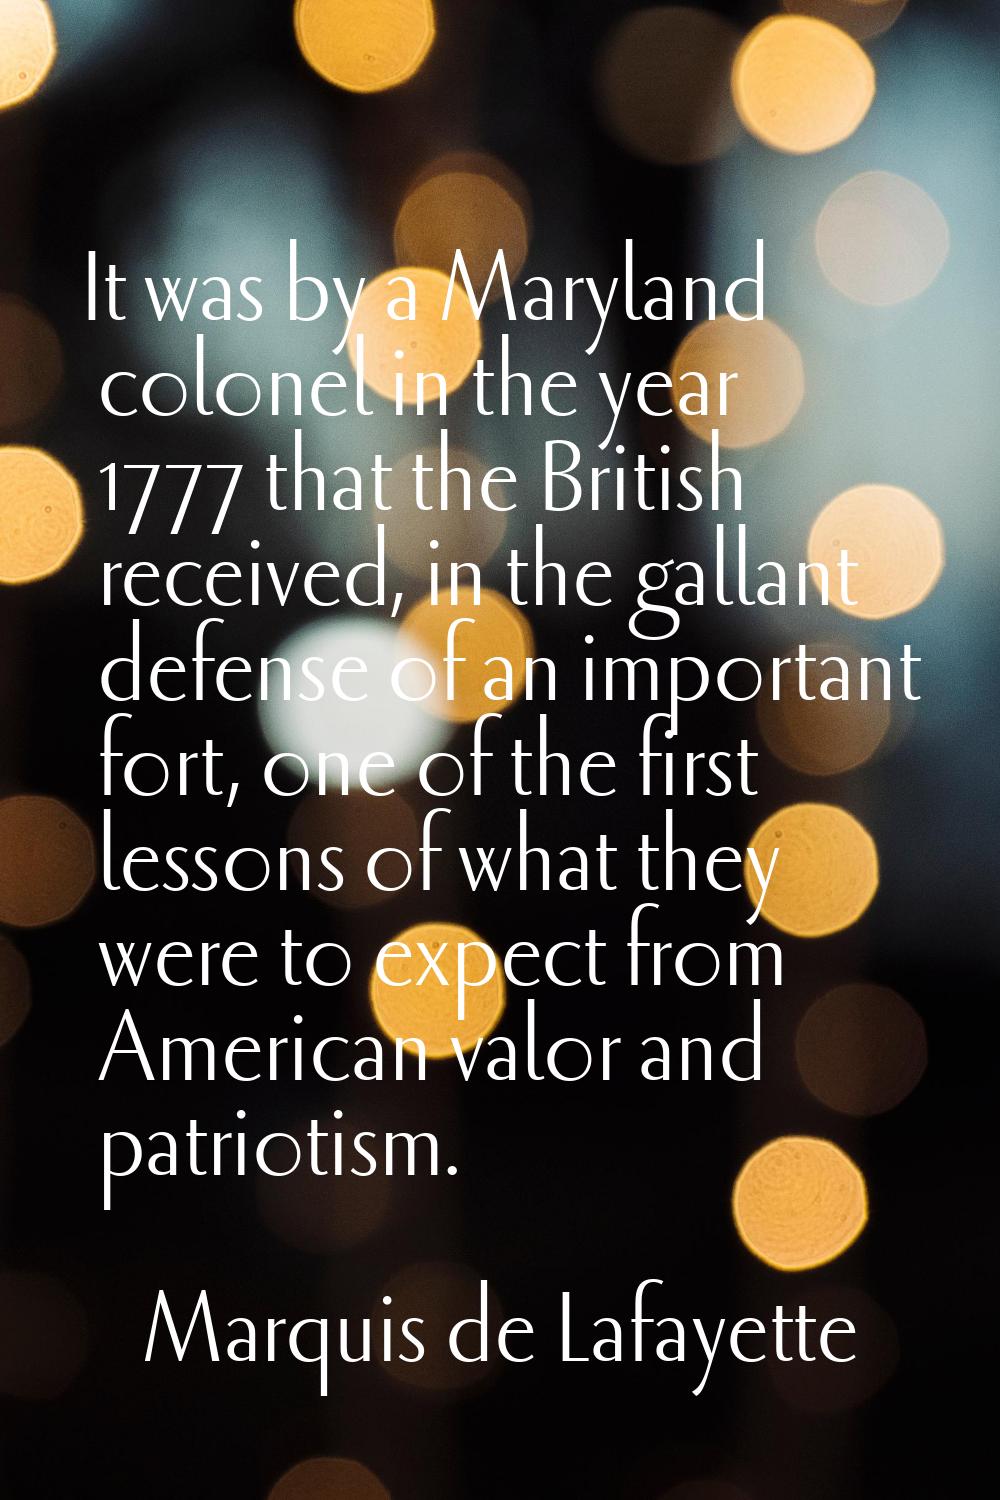 It was by a Maryland colonel in the year 1777 that the British received, in the gallant defense of 